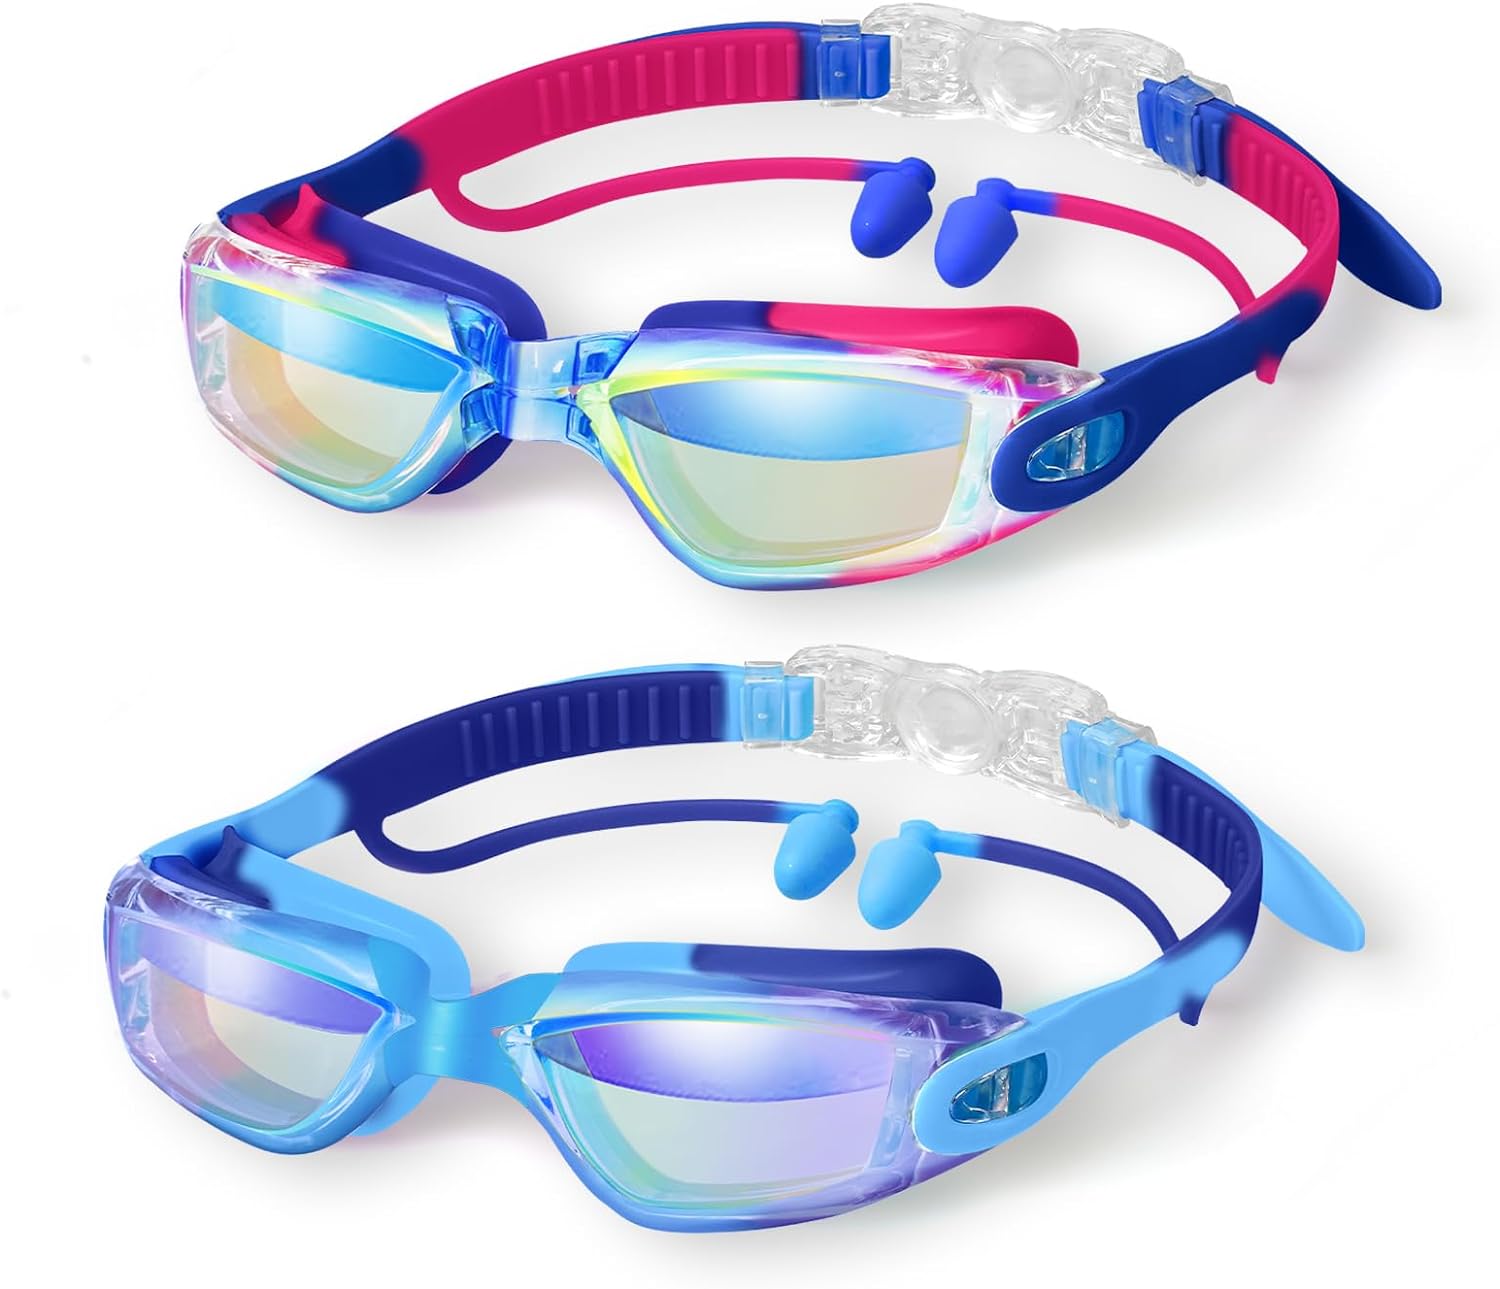 XDX Kids Swim Goggles, 2 Pack Kids Goggles With UV Protection, Anti Fog No Leaking Swimming Goggles for Boys Girls Teens 4-14